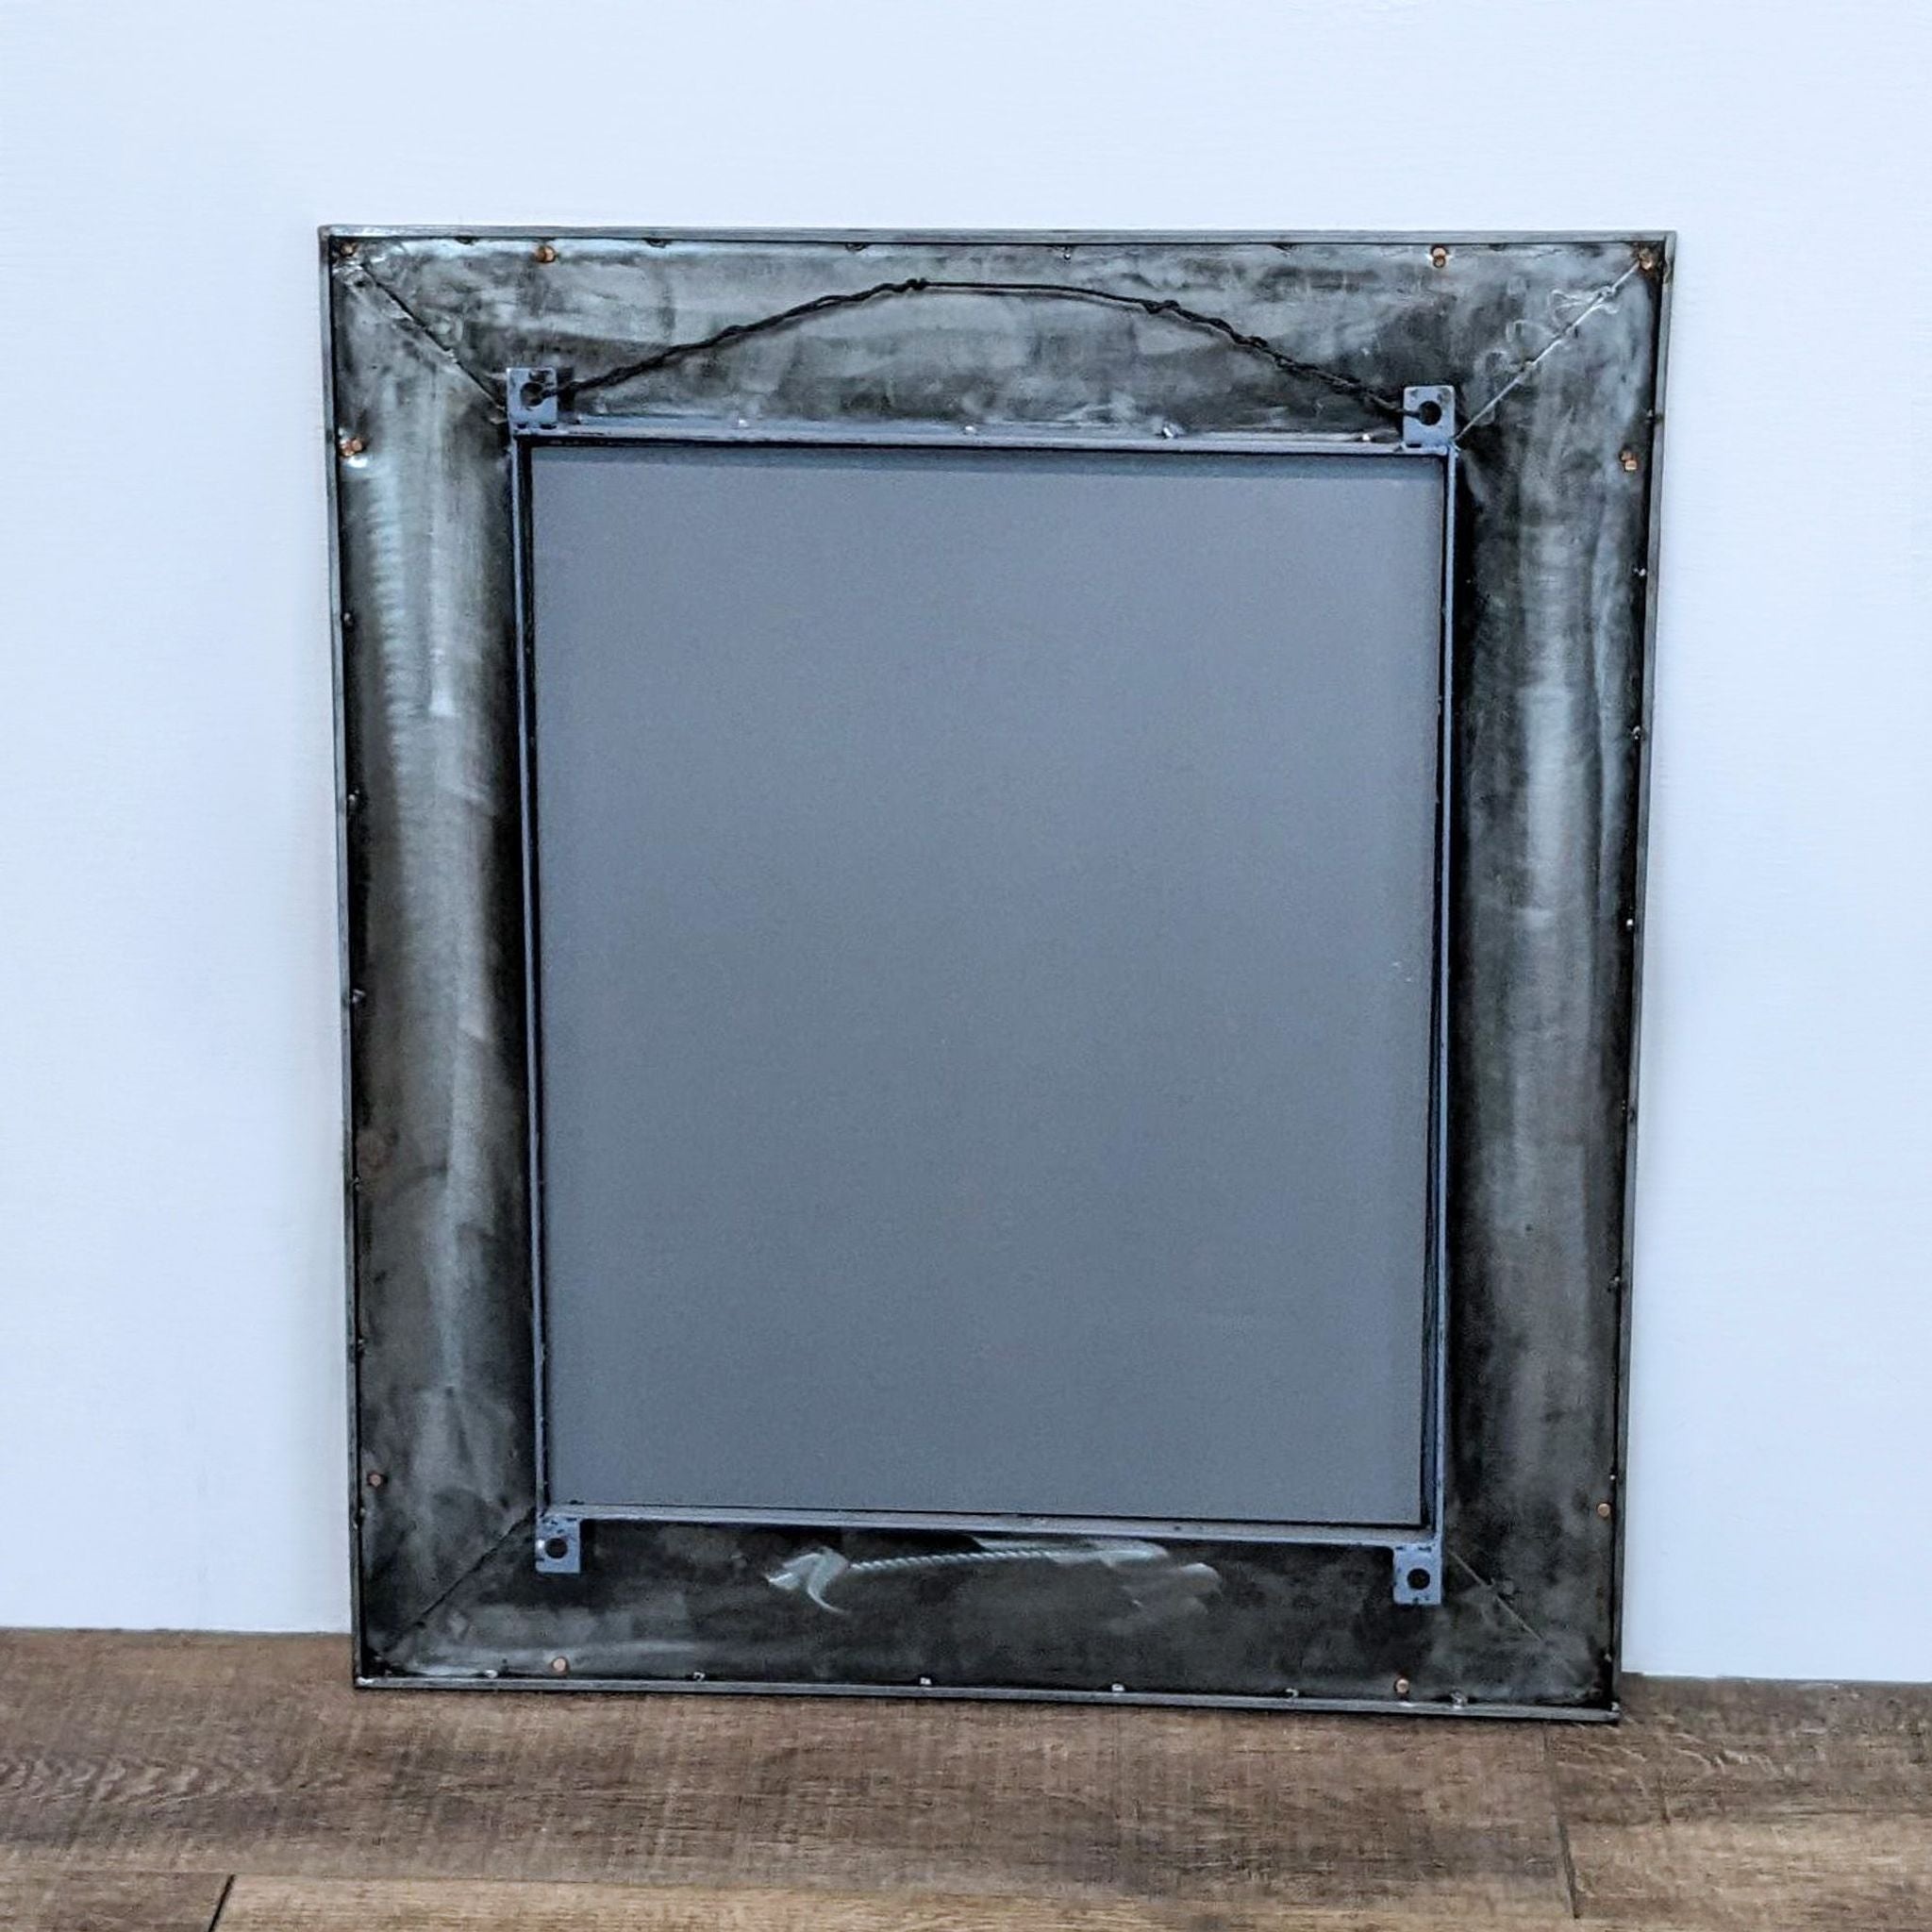 Rear view of a Reperch metal wall mirror, showing the frame's construction and hanging mechanism against a wooden floor and white wall.